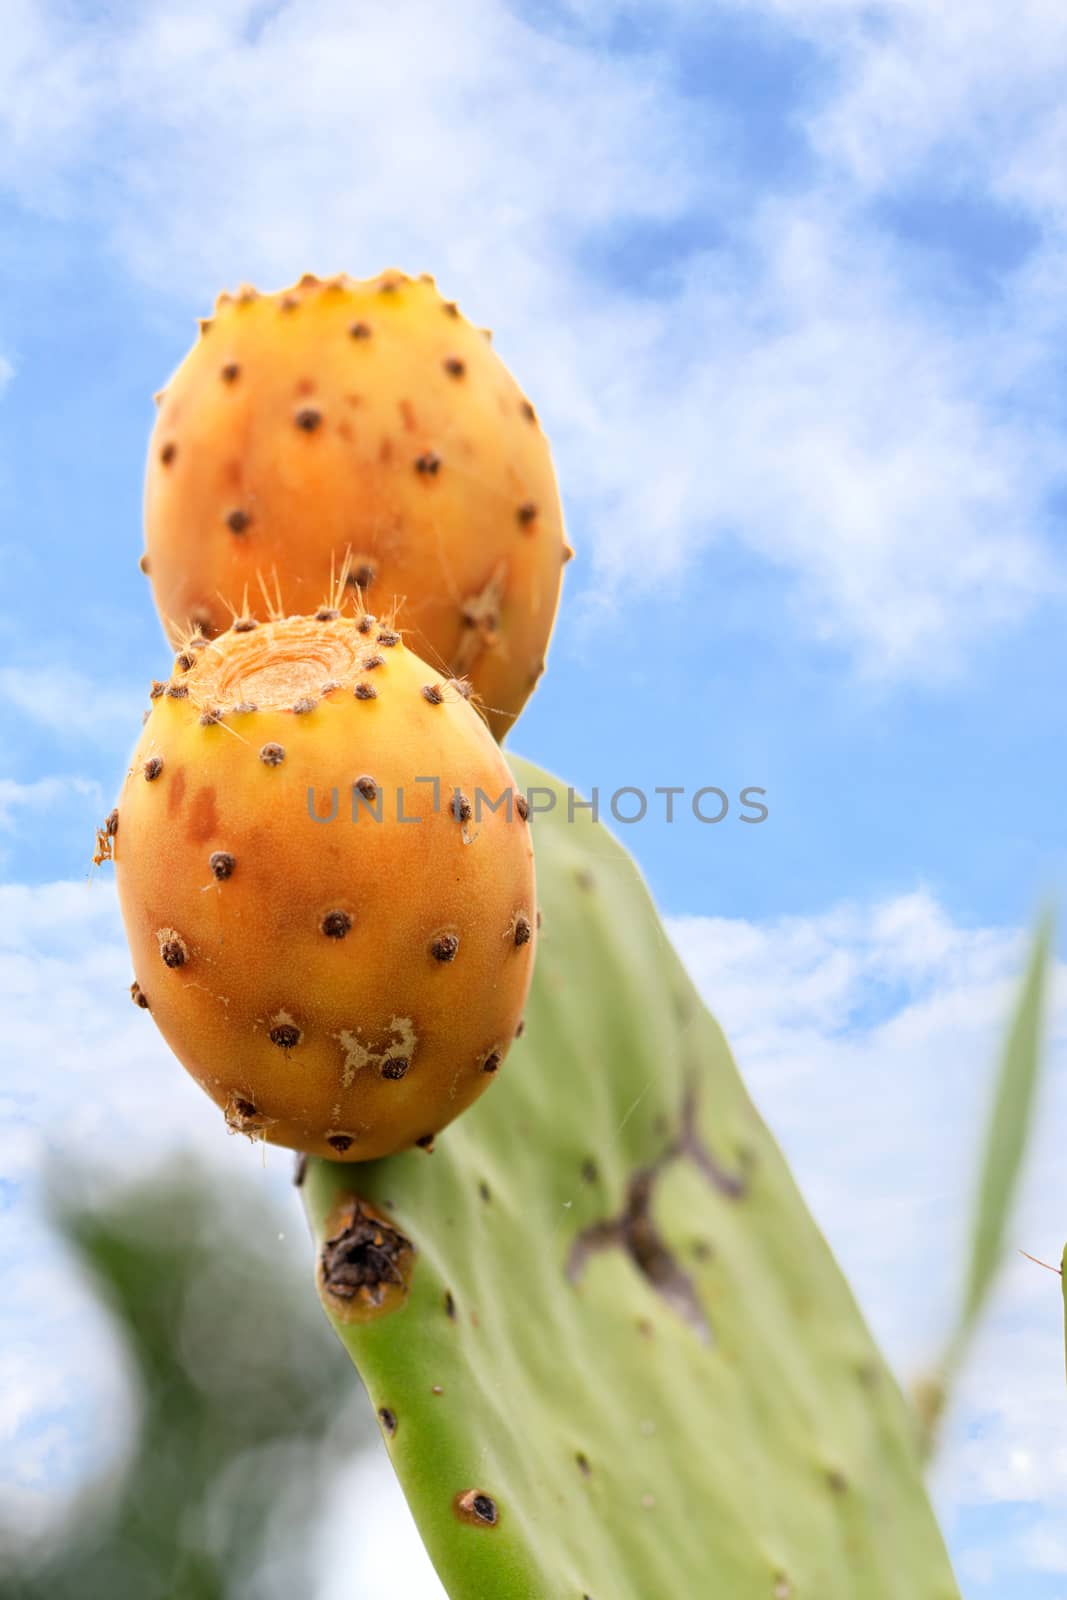 Fruits of an orange ripe sweet prickly pear cactus and prickly pear cactus against the background of a blue slightly cloudy sky. Close-up, vertical image with copy space. by Sergii